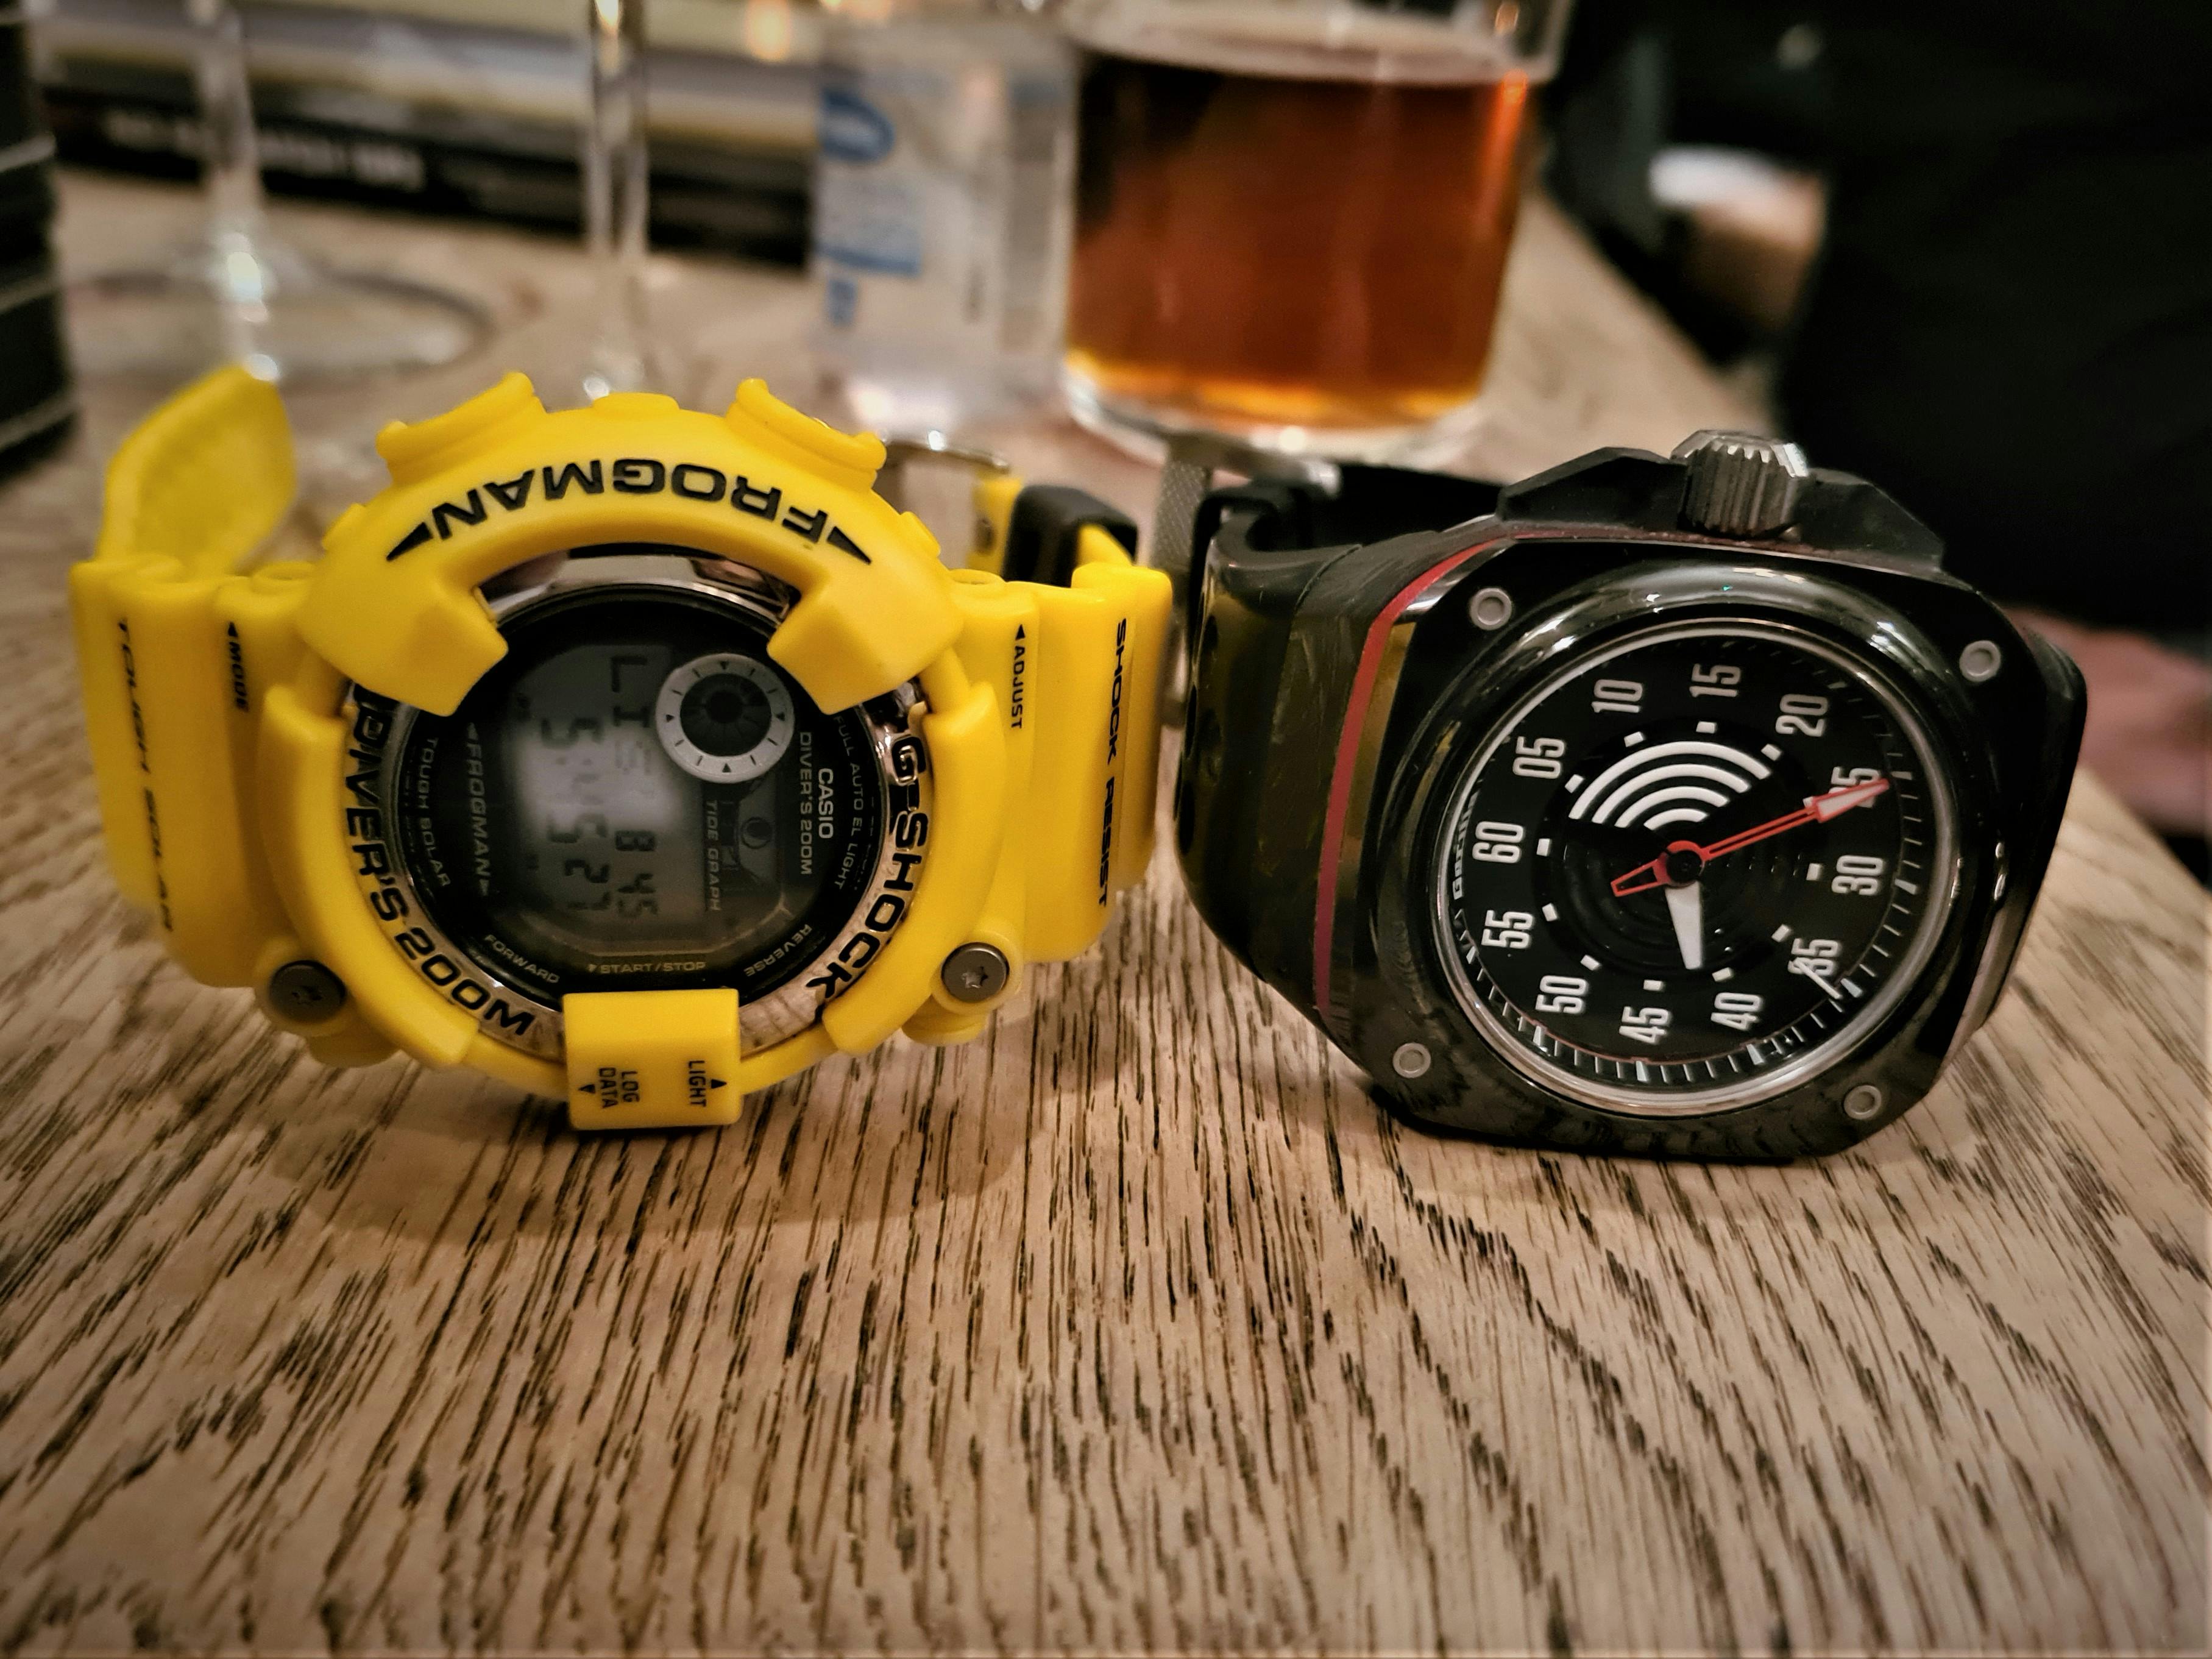 Two watches side by side on a table at a watch meetup event, one yellow G-Shock, one Black Gorilla Fastback.